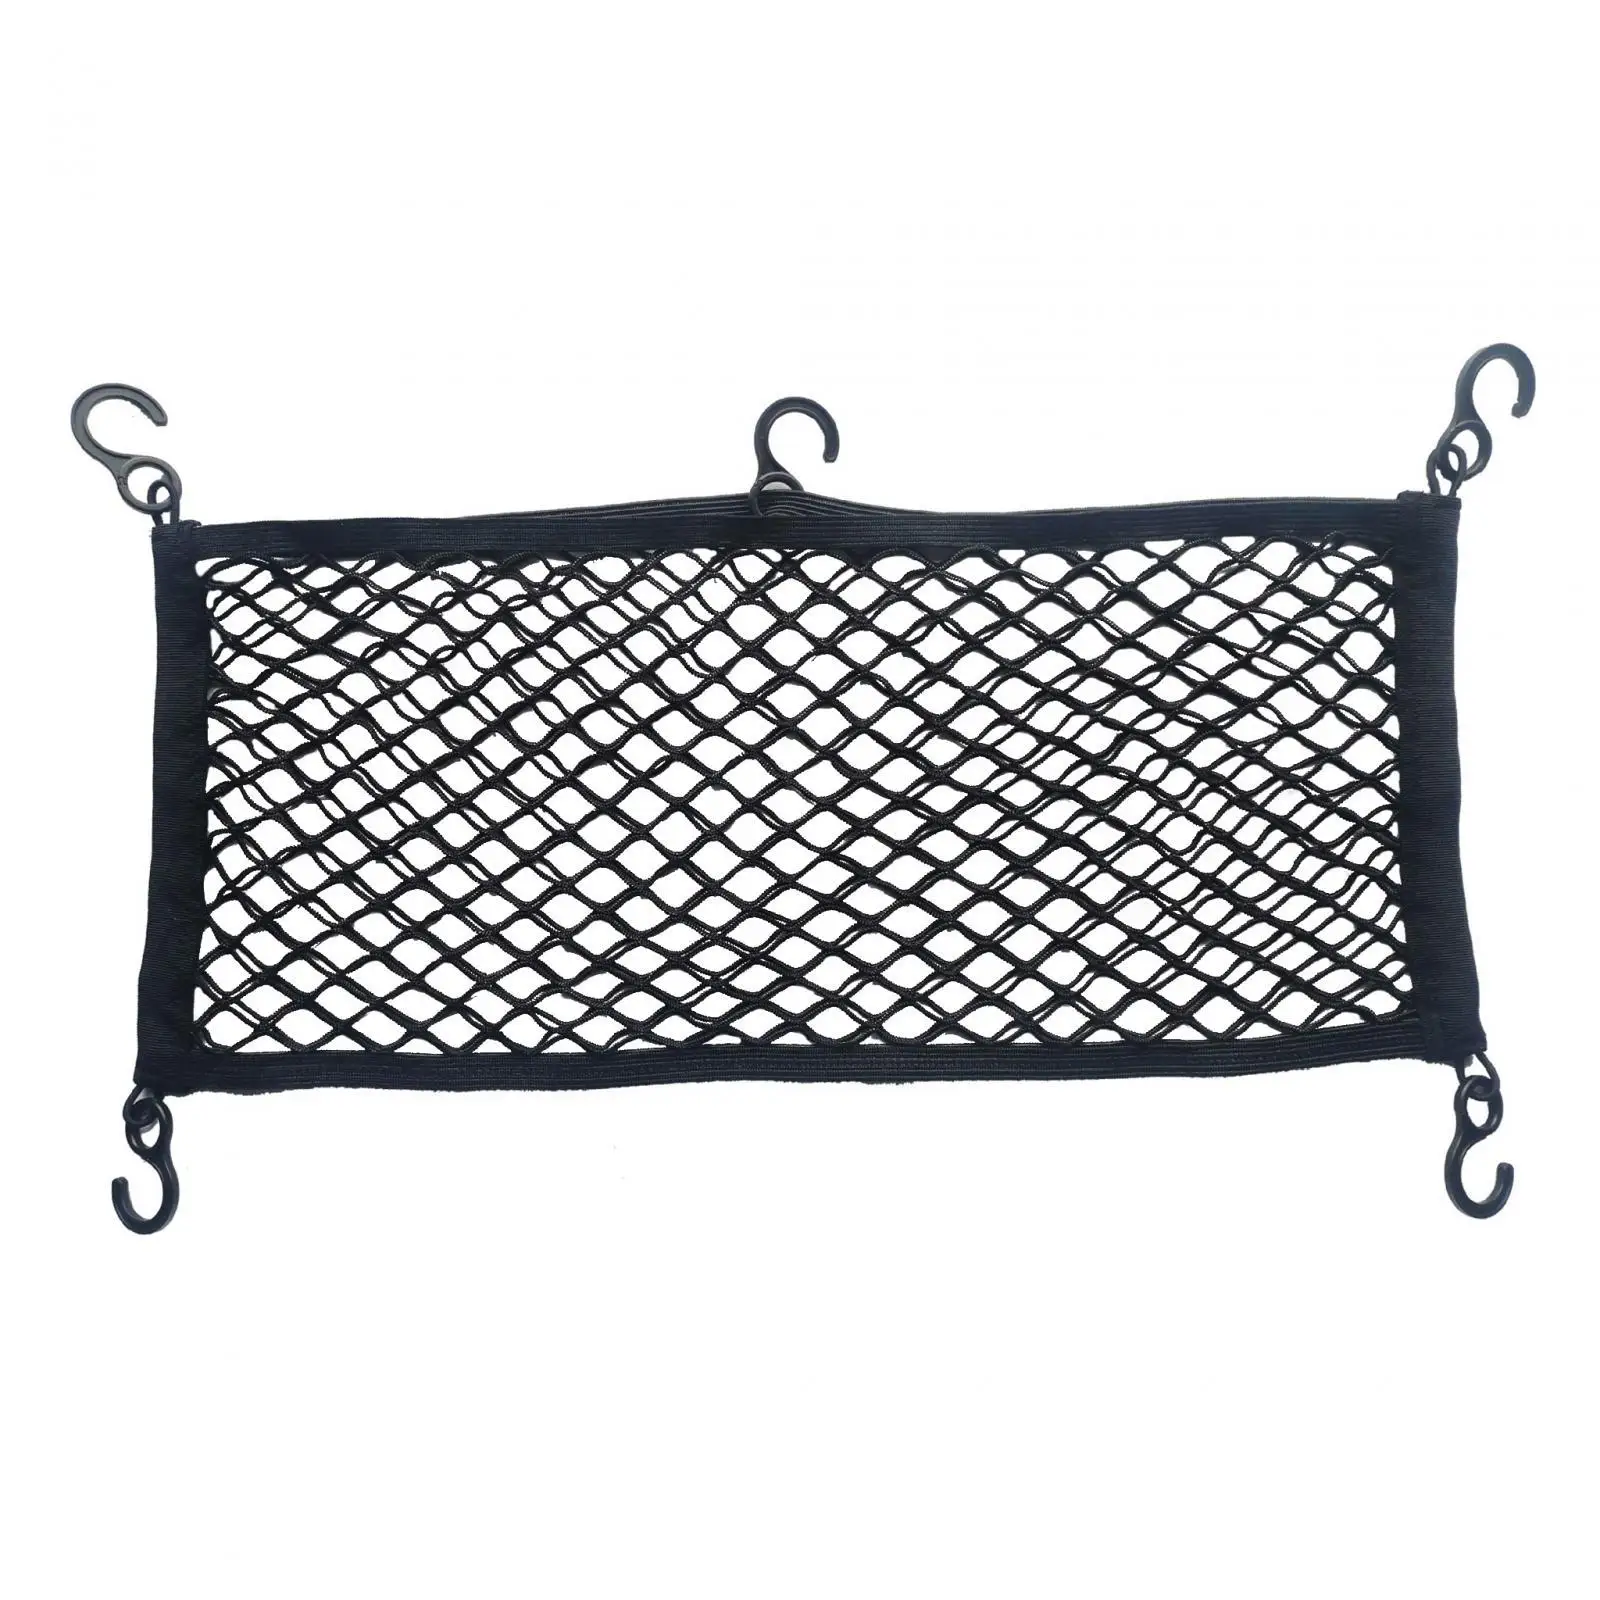 Folding Trolley Carts Net Cargo Net Carts with 5 Hooks Multifunctional Wagon Cargo Net Camping Carts Net for Toys and Snacks